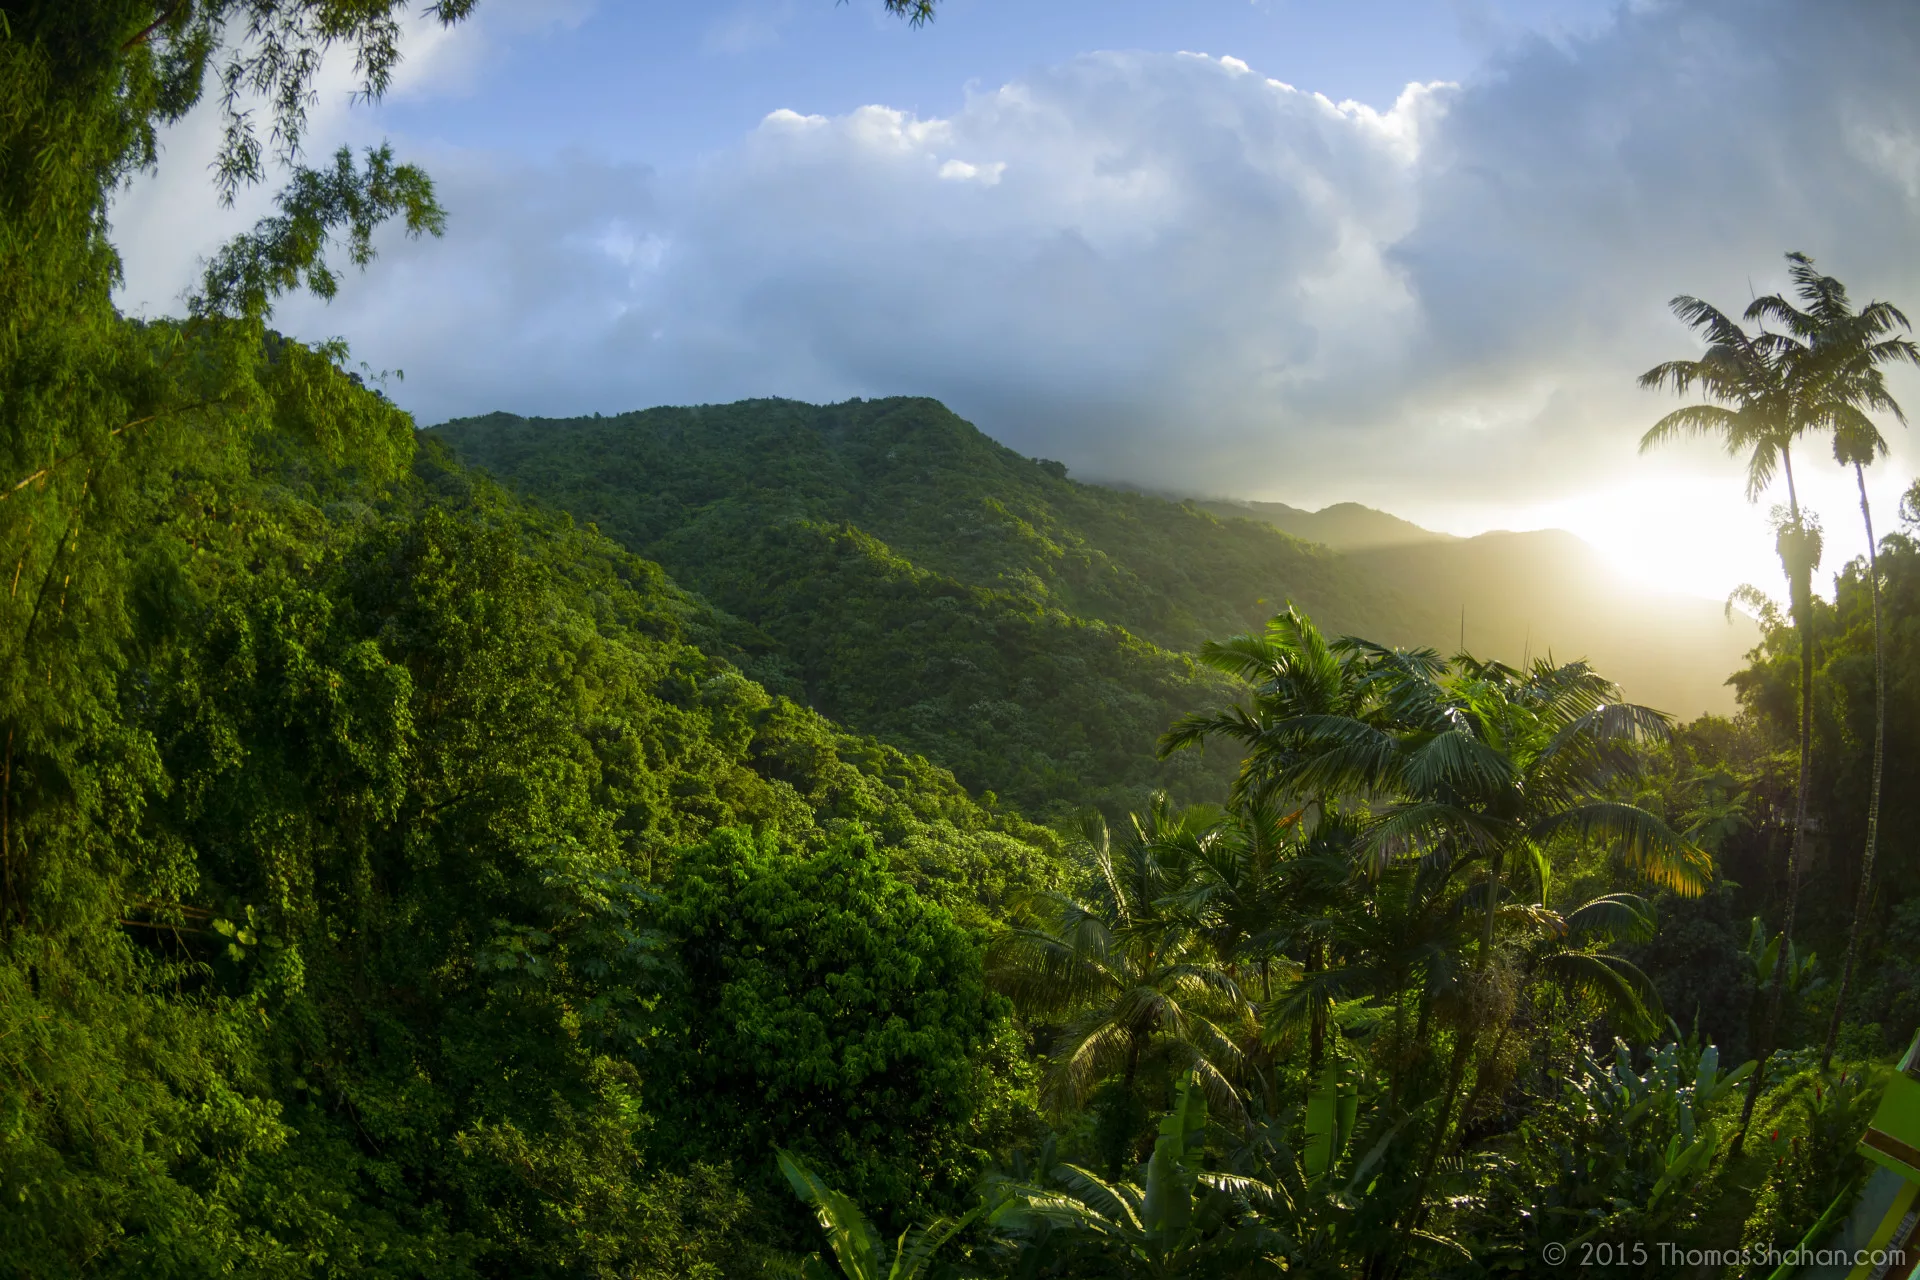 Yunque National Forest in Puerto Rico. Photo credit: Thomas Shagan